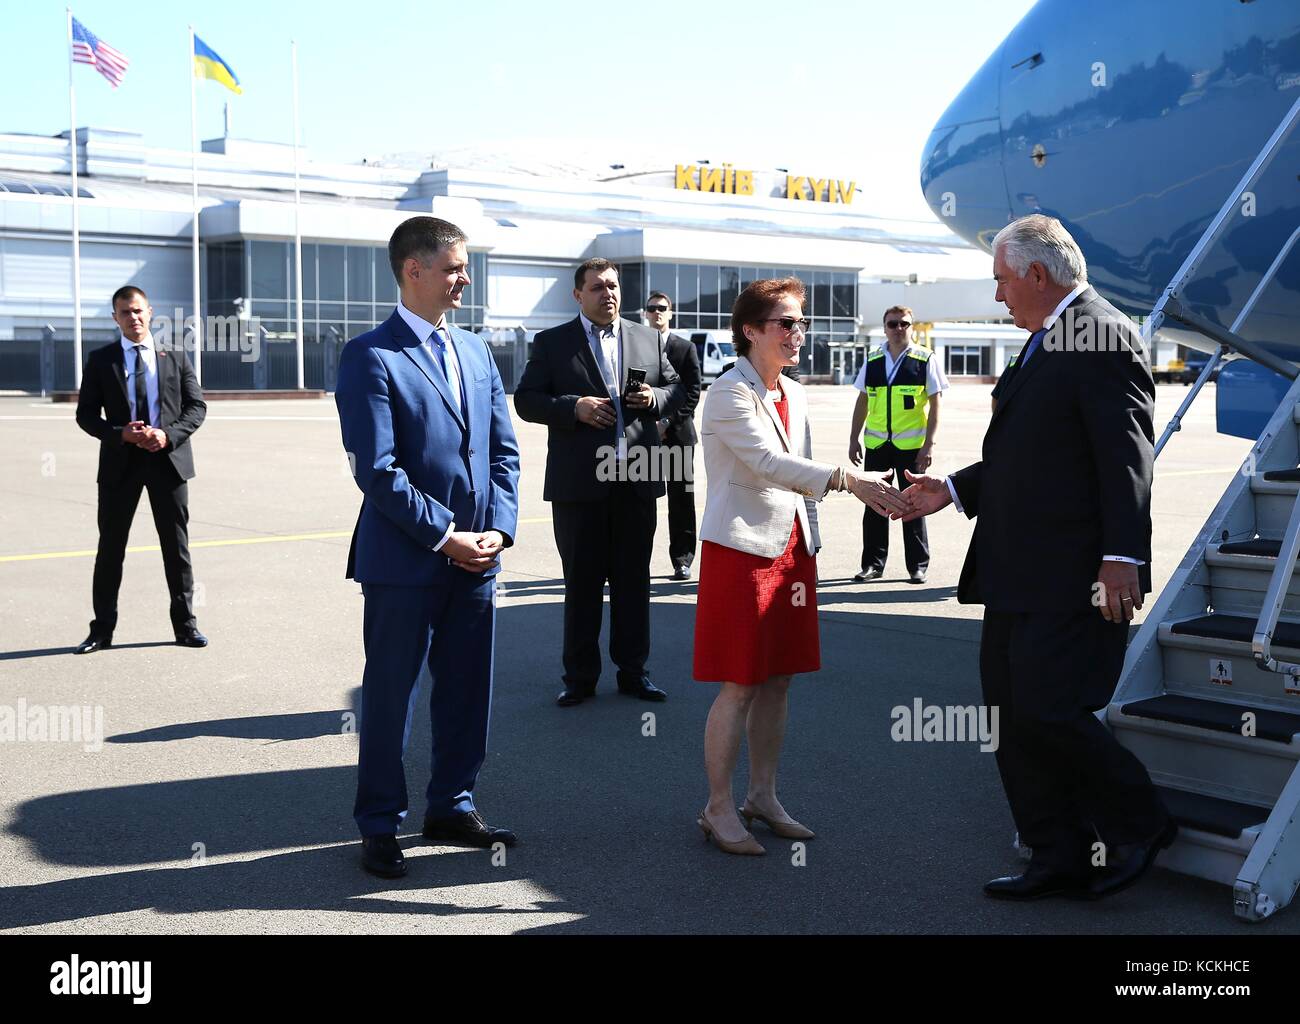 U.S. Ambassador to Ukraine Marie Yovanovitch (left) greets U.S. Secretary of State Rex Tillerson as he arrives at the Kyiv Boryspil Airport July 9, 2017 in Kyiv, Ukraine.    (photo by State Department Photo via Planetpix) Stock Photo